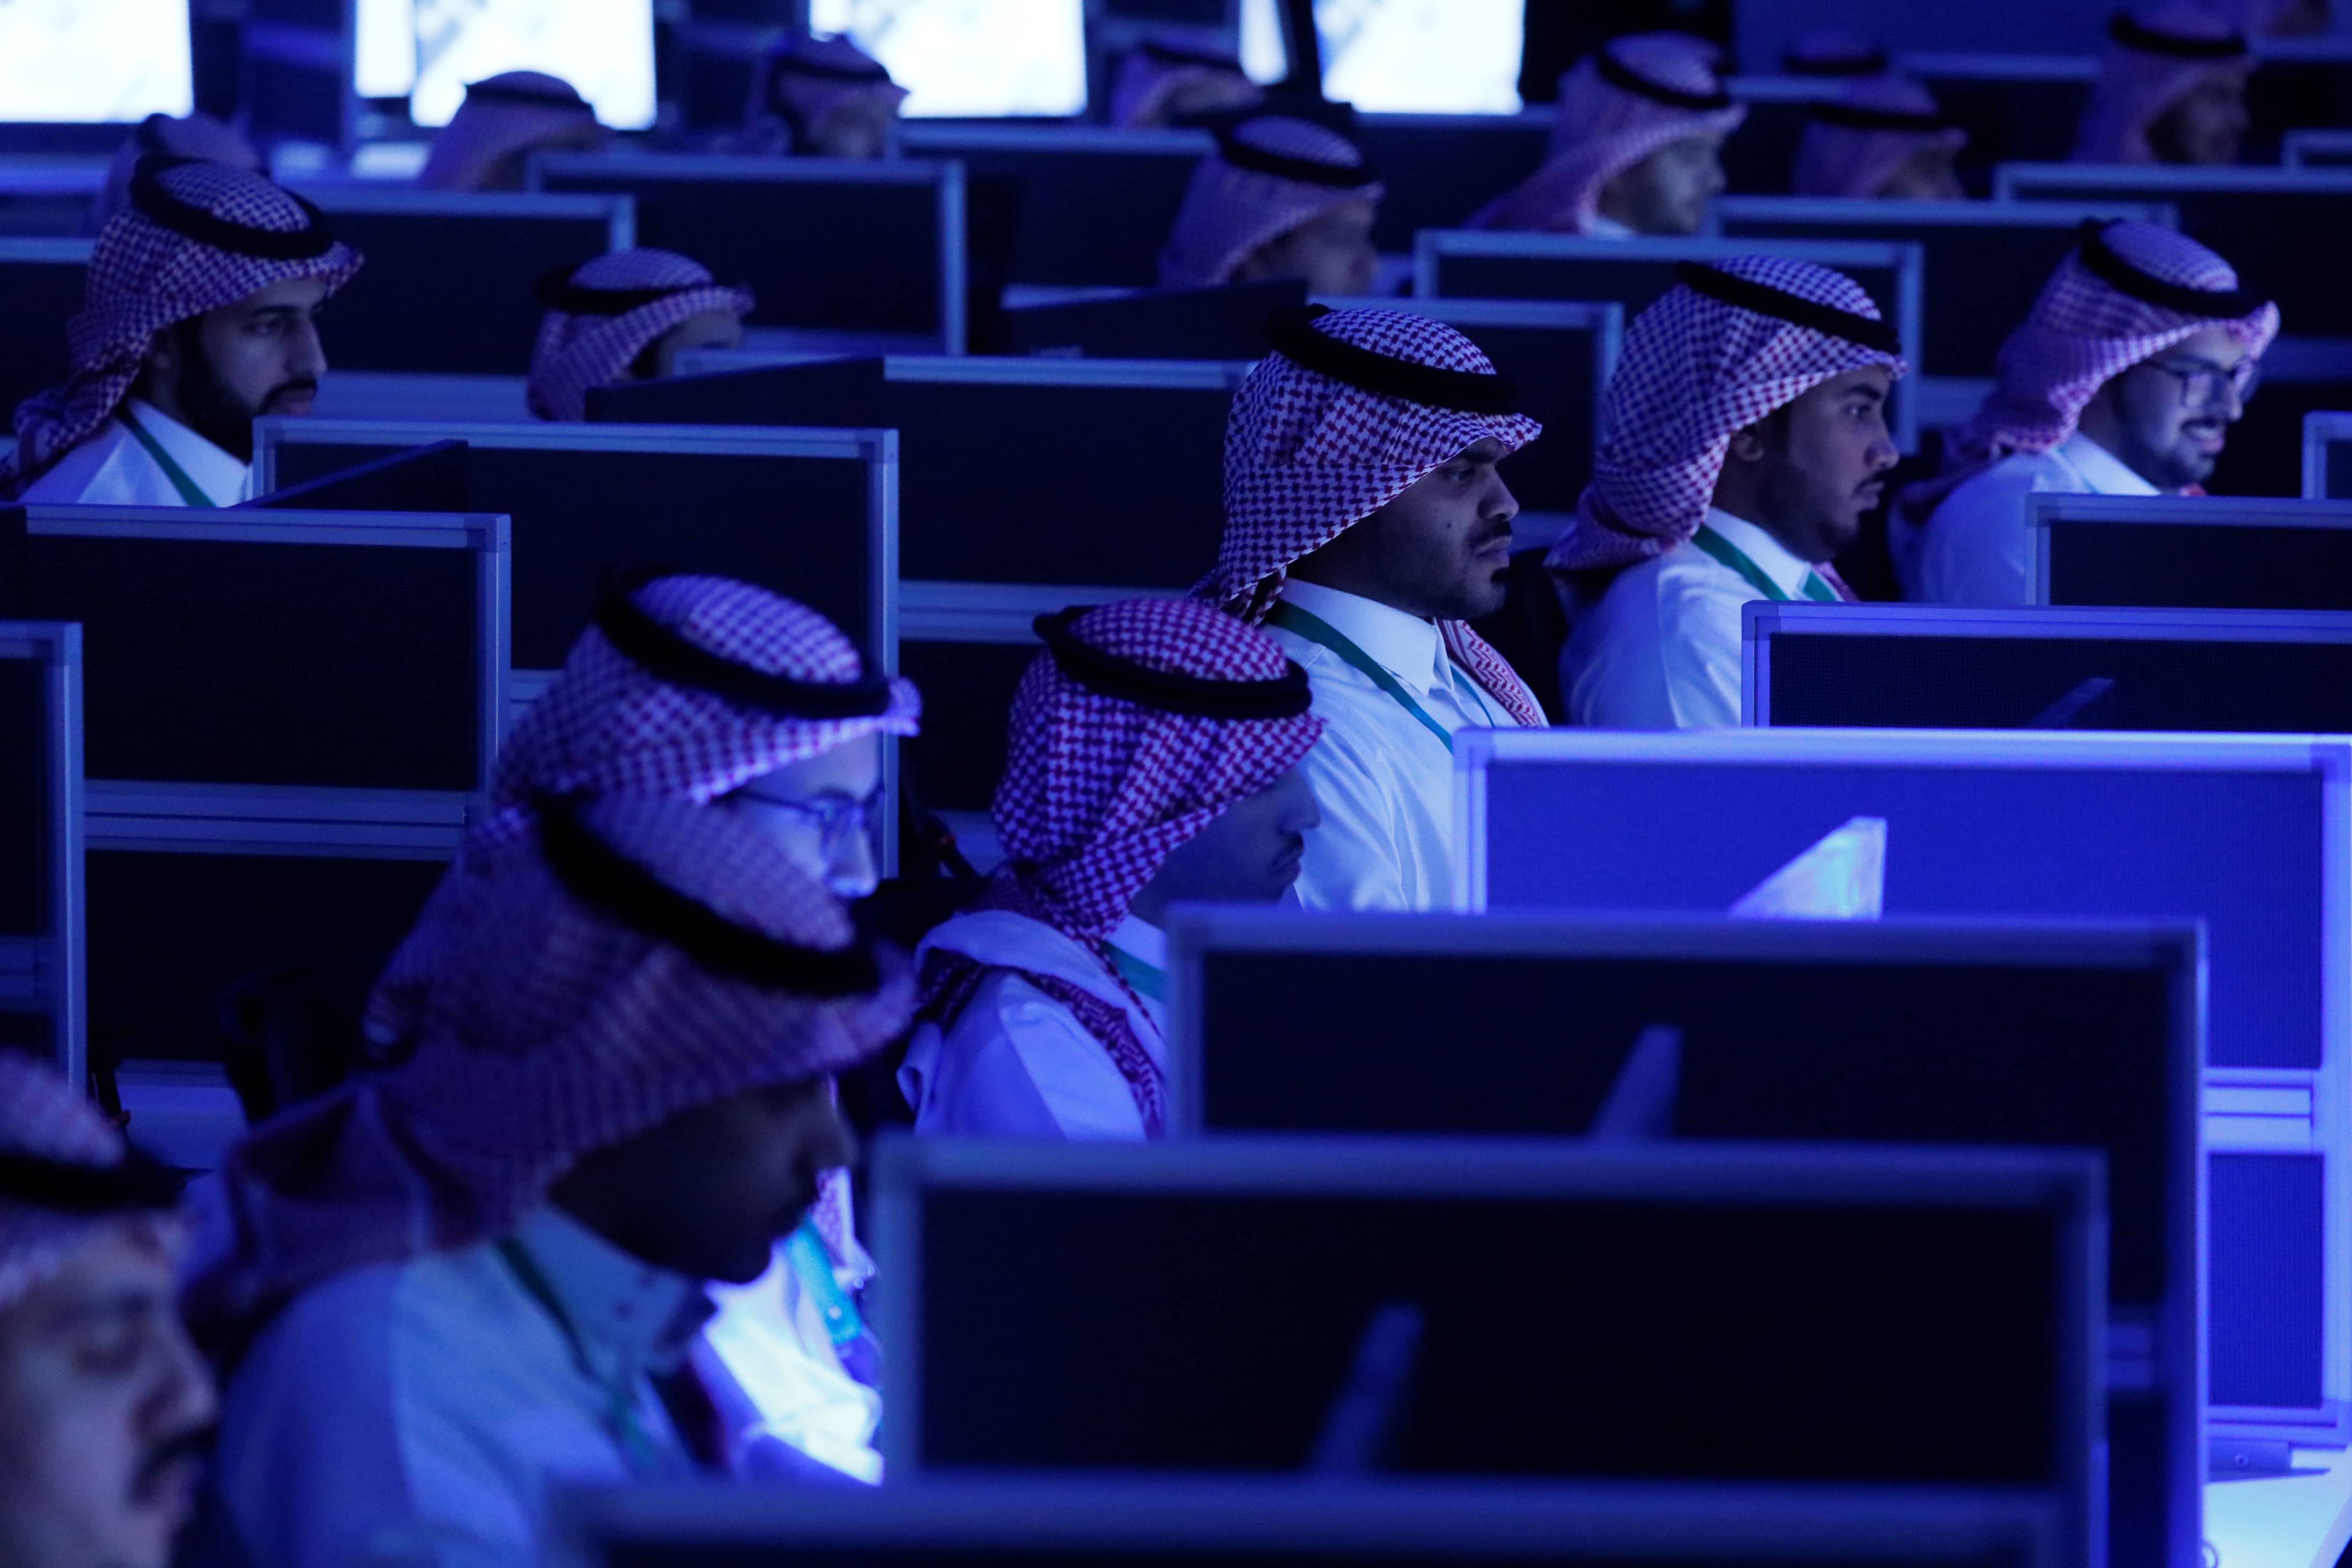 Data collectors sit at screens in the new Global Center for Combatting Extremist Ideology in Riyadh, Saudi Arabia, 21 May 2017, REUTERS/Jonathan Ernst